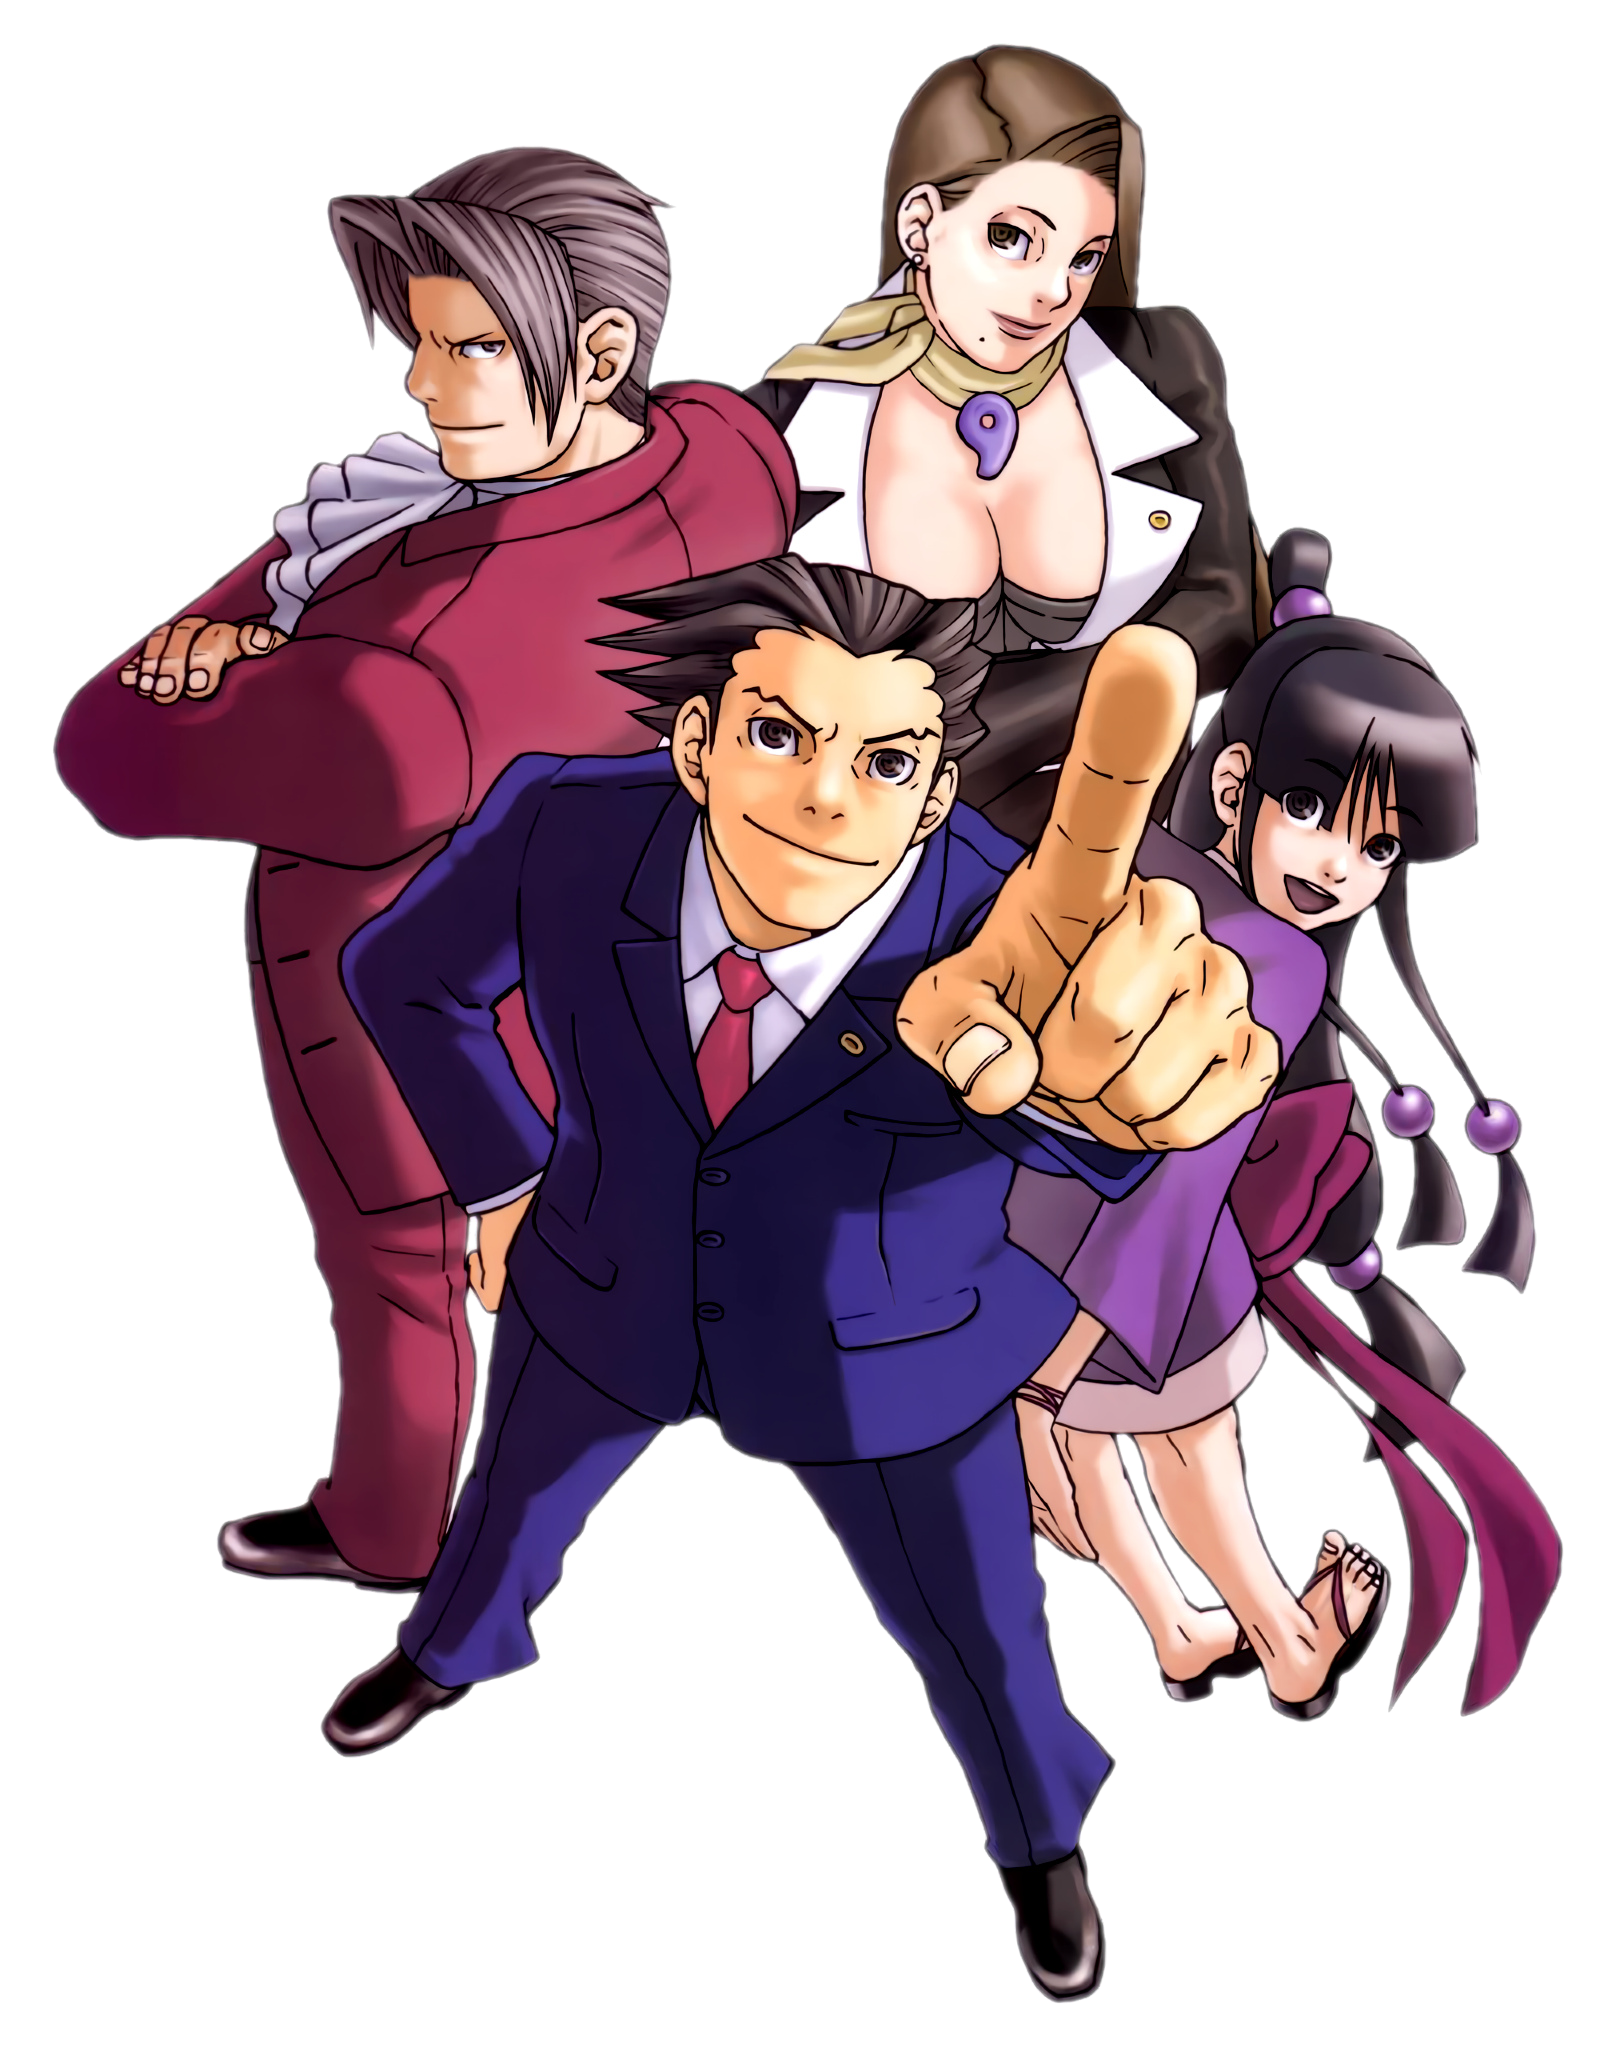 Ace Attorney: The 10 Most Memorable Characters From The First Game